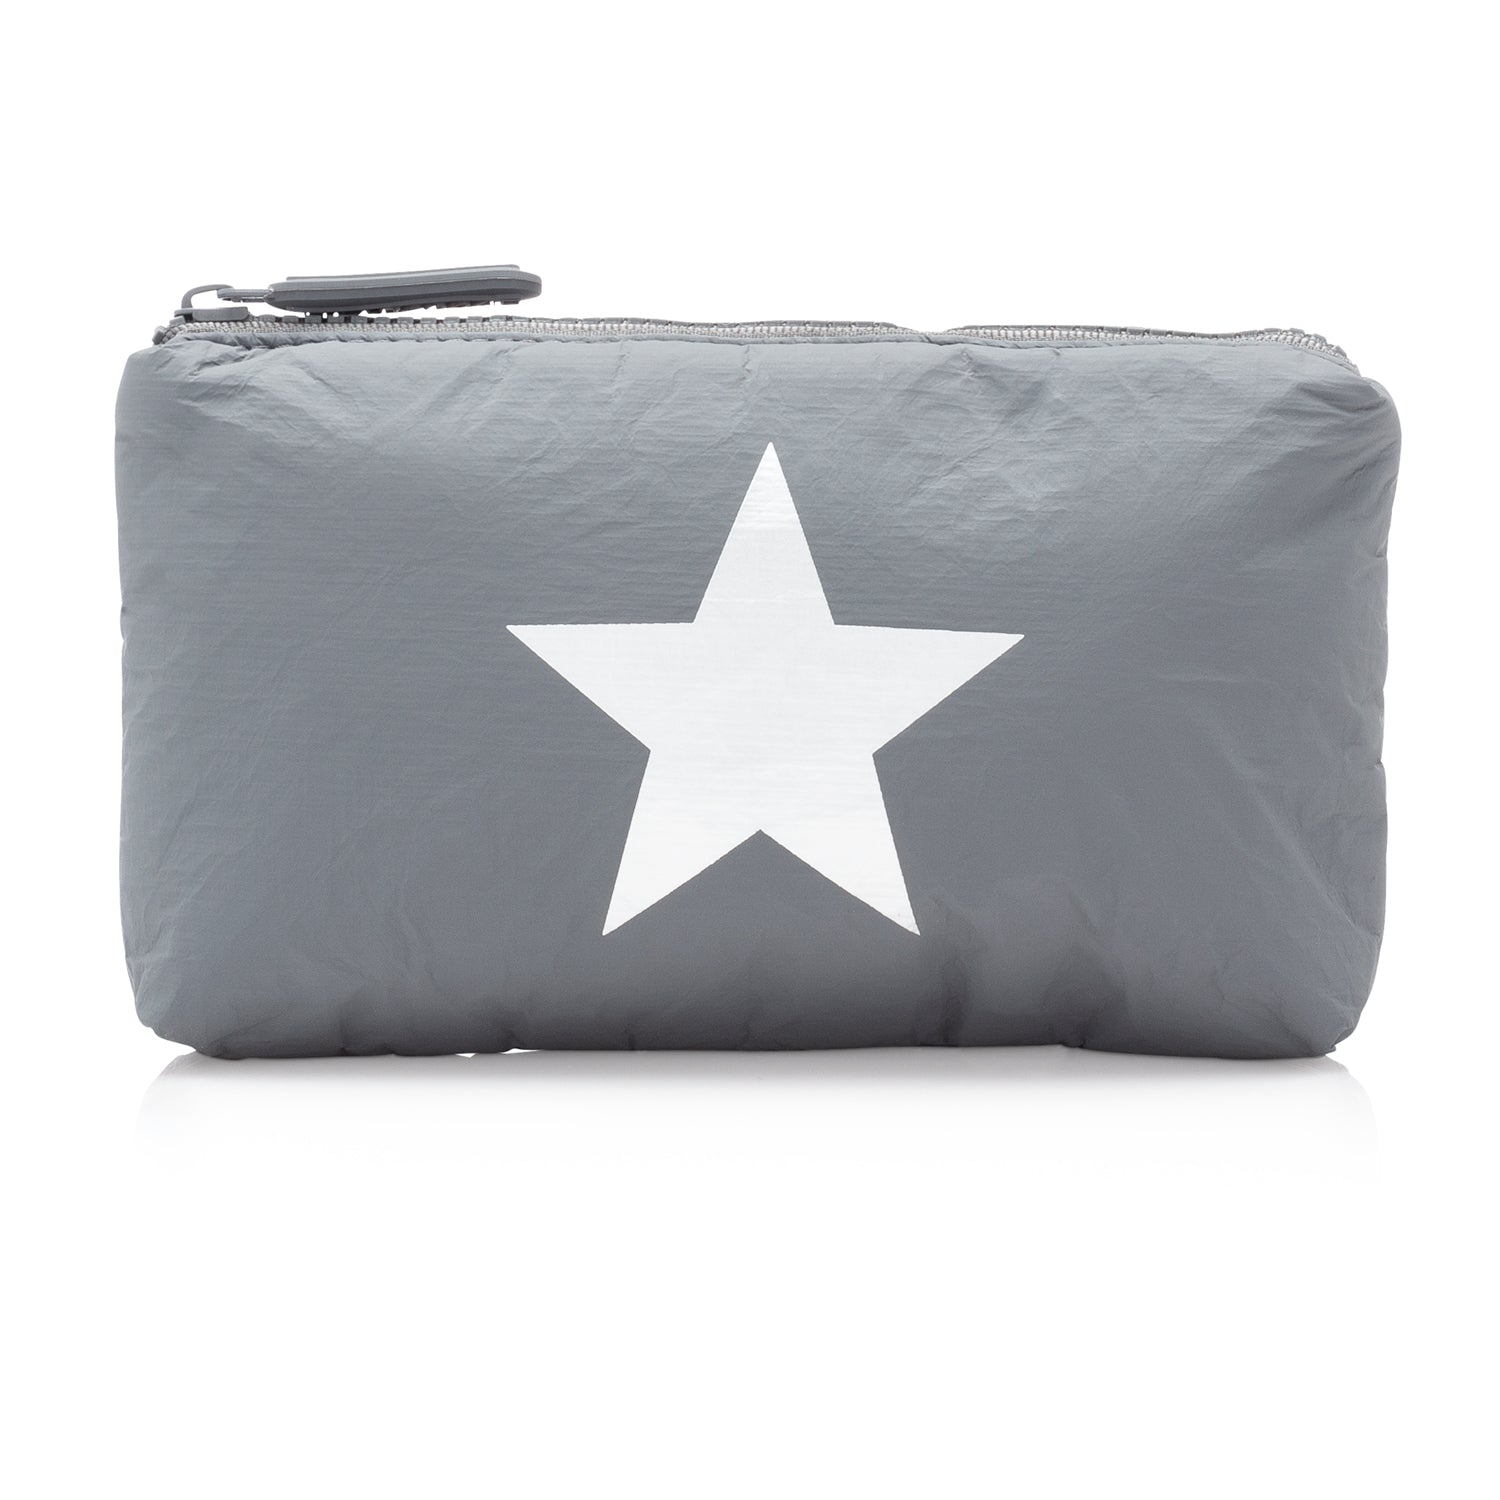 Mini Padded Zipper Pack in Cool Gray with Silver Star